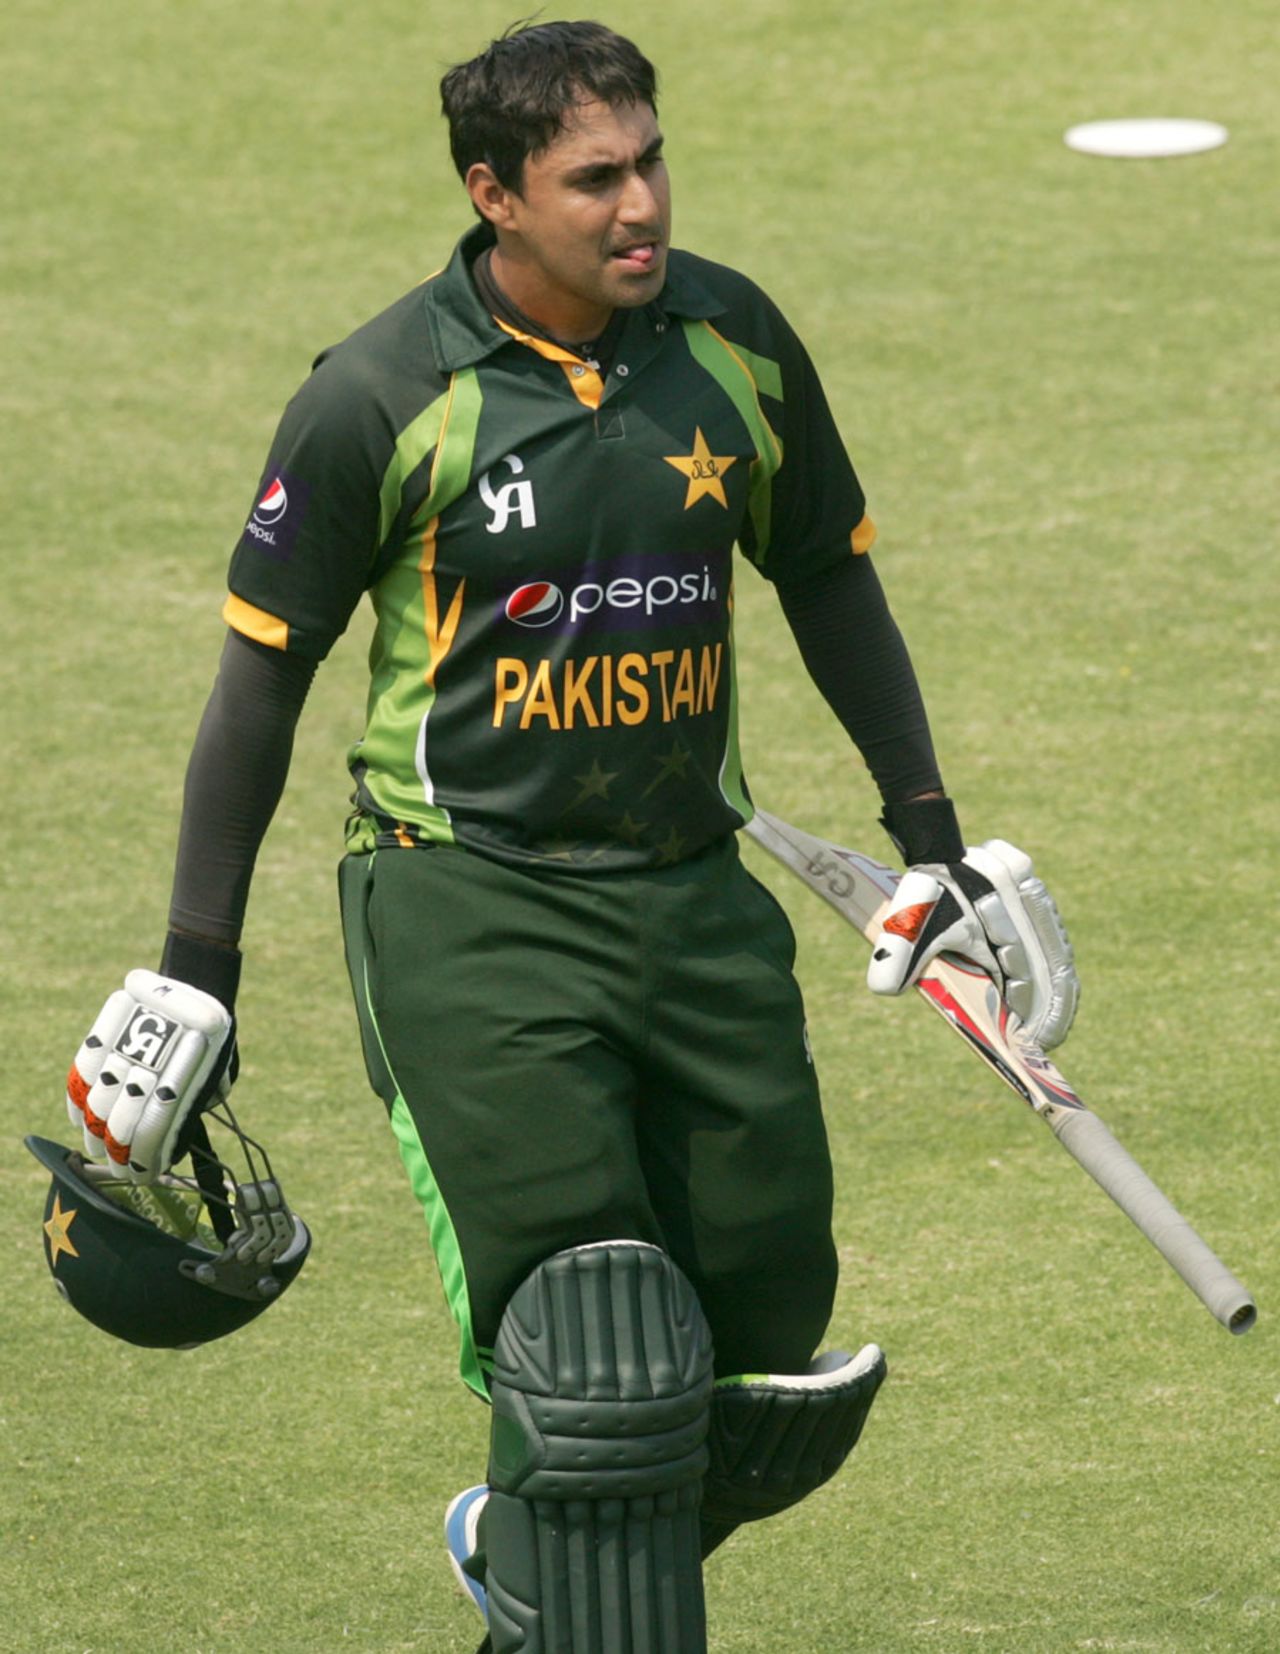 Nasir Jamshed trudges back to the pavilion after nicking one to the keeper, Zimbabwe v Pakistan, 3rd ODI, Harare, August 31, 2013